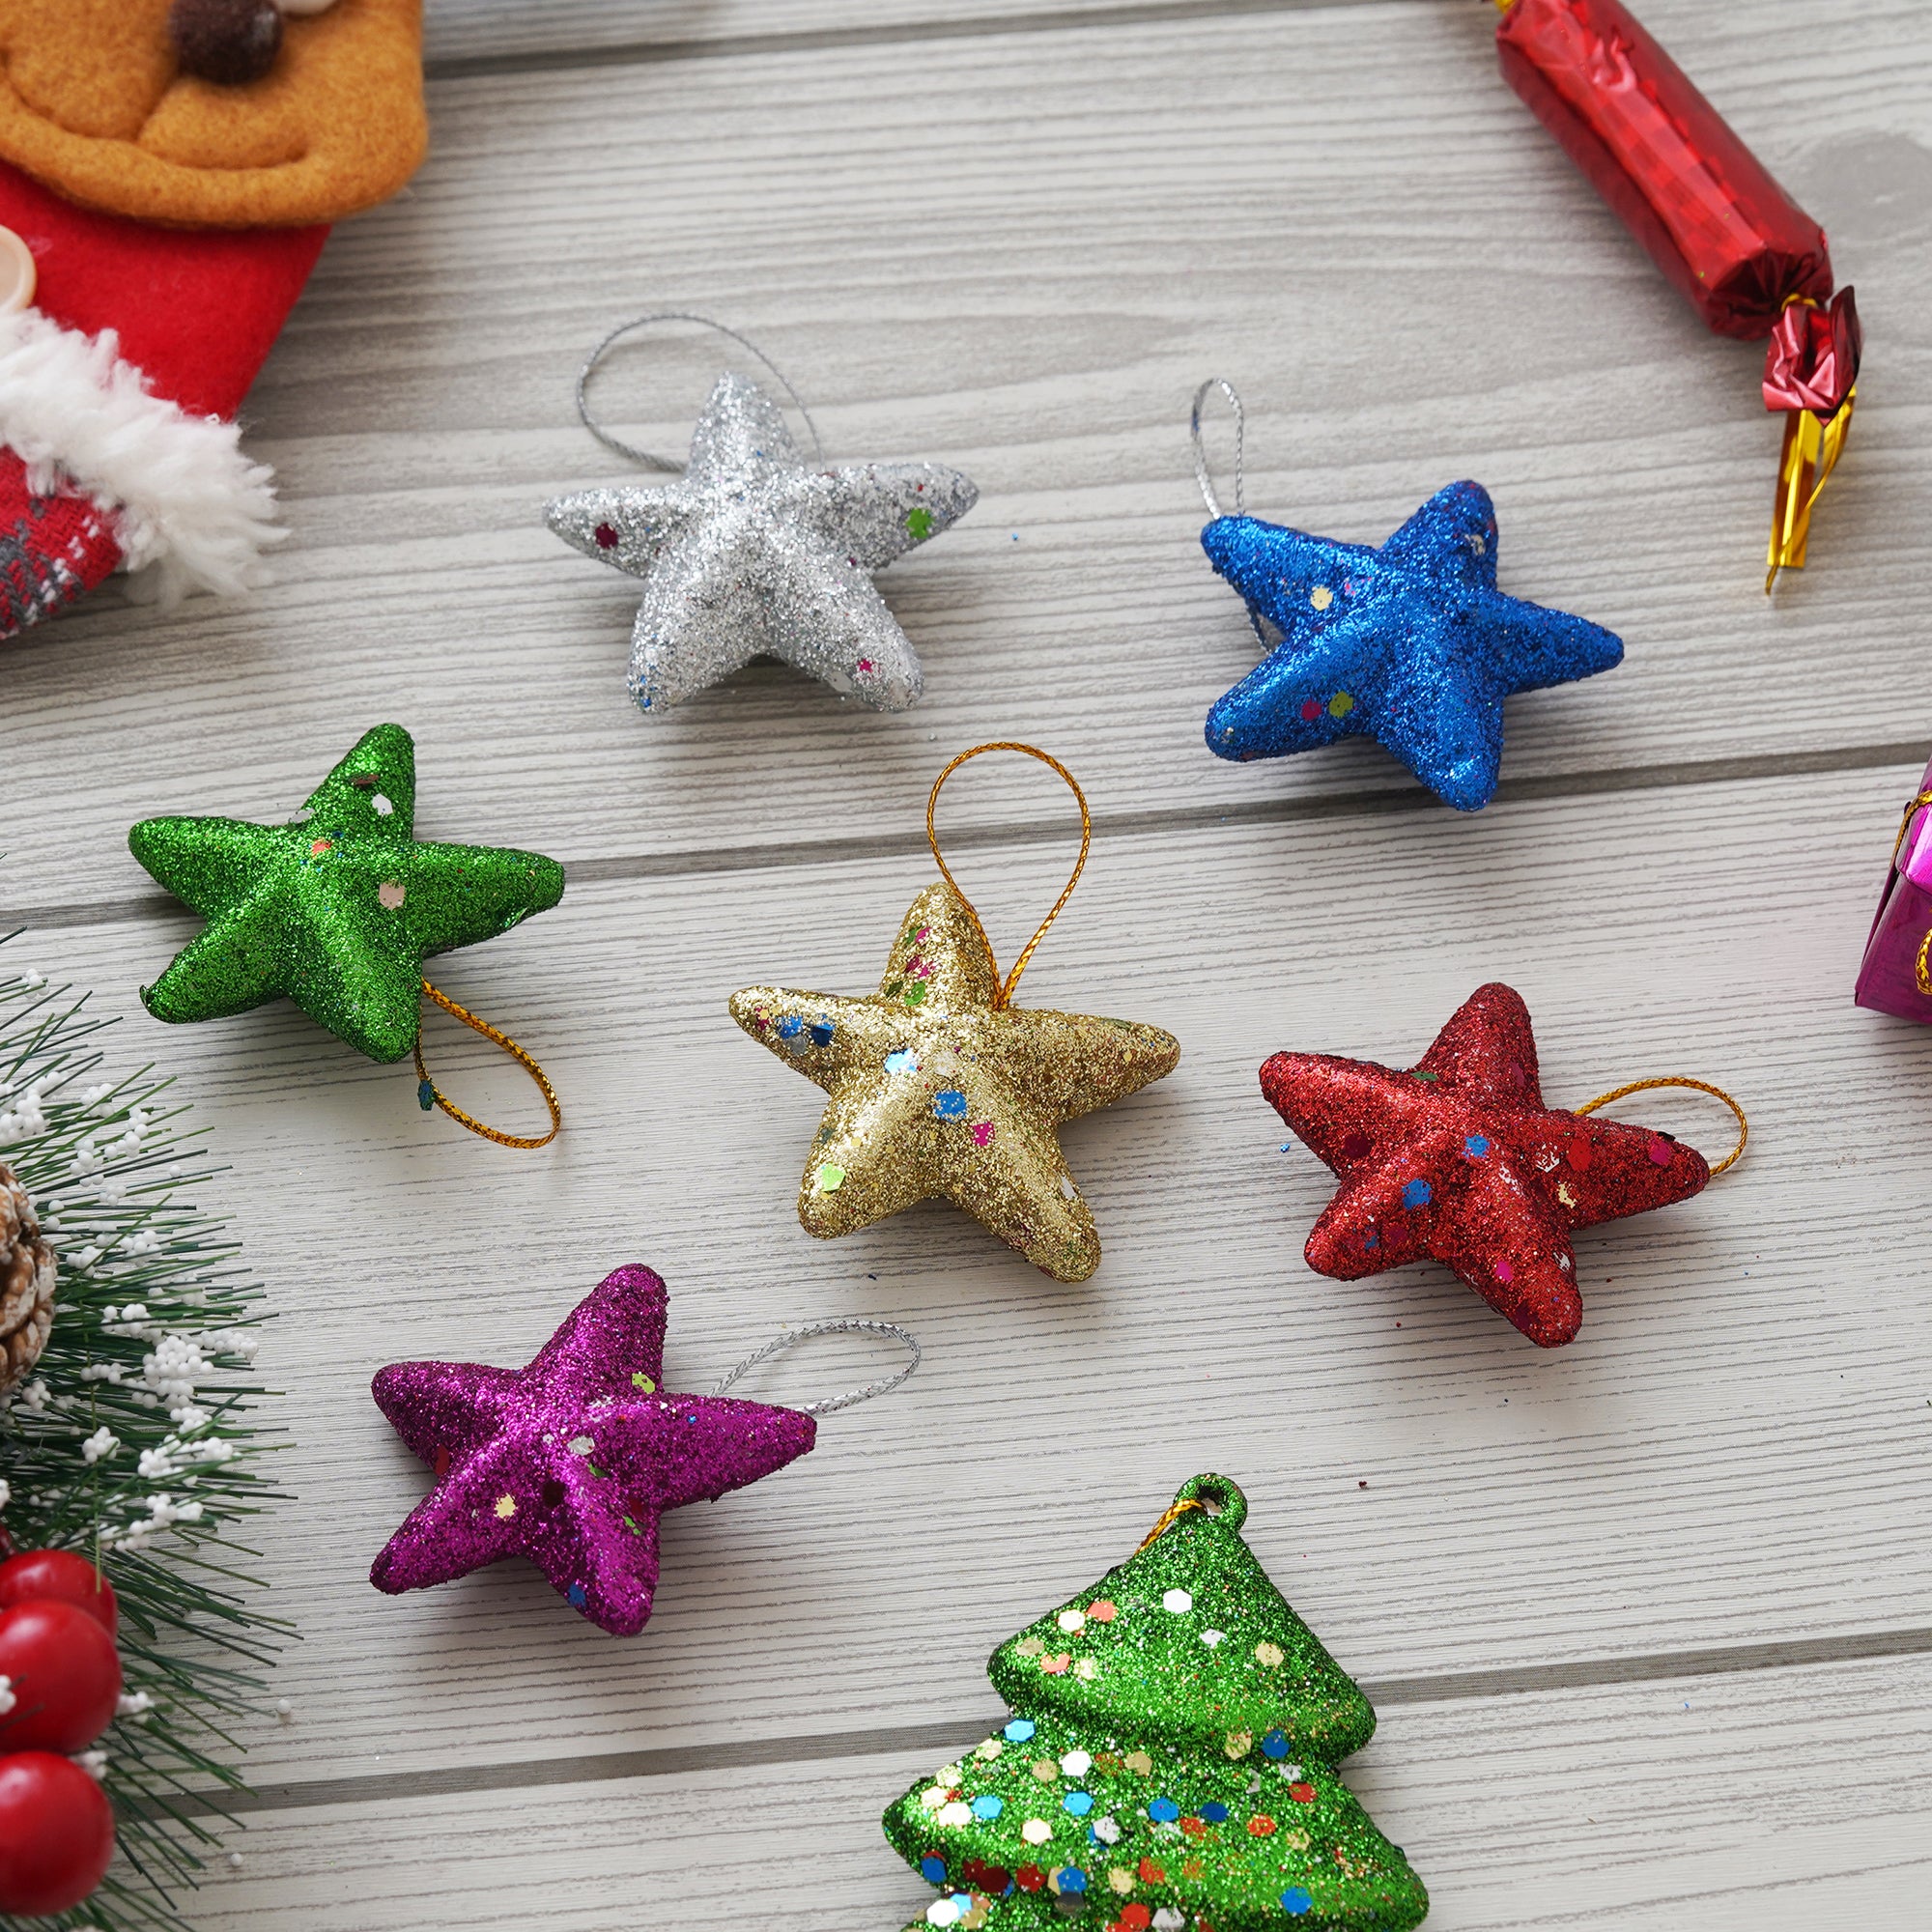 eCraftIndia Multicolor Glittering Xmas Stars for Decorating Christmas Tree and Hanging on Walls, Doors Set of 5 Pieces 4